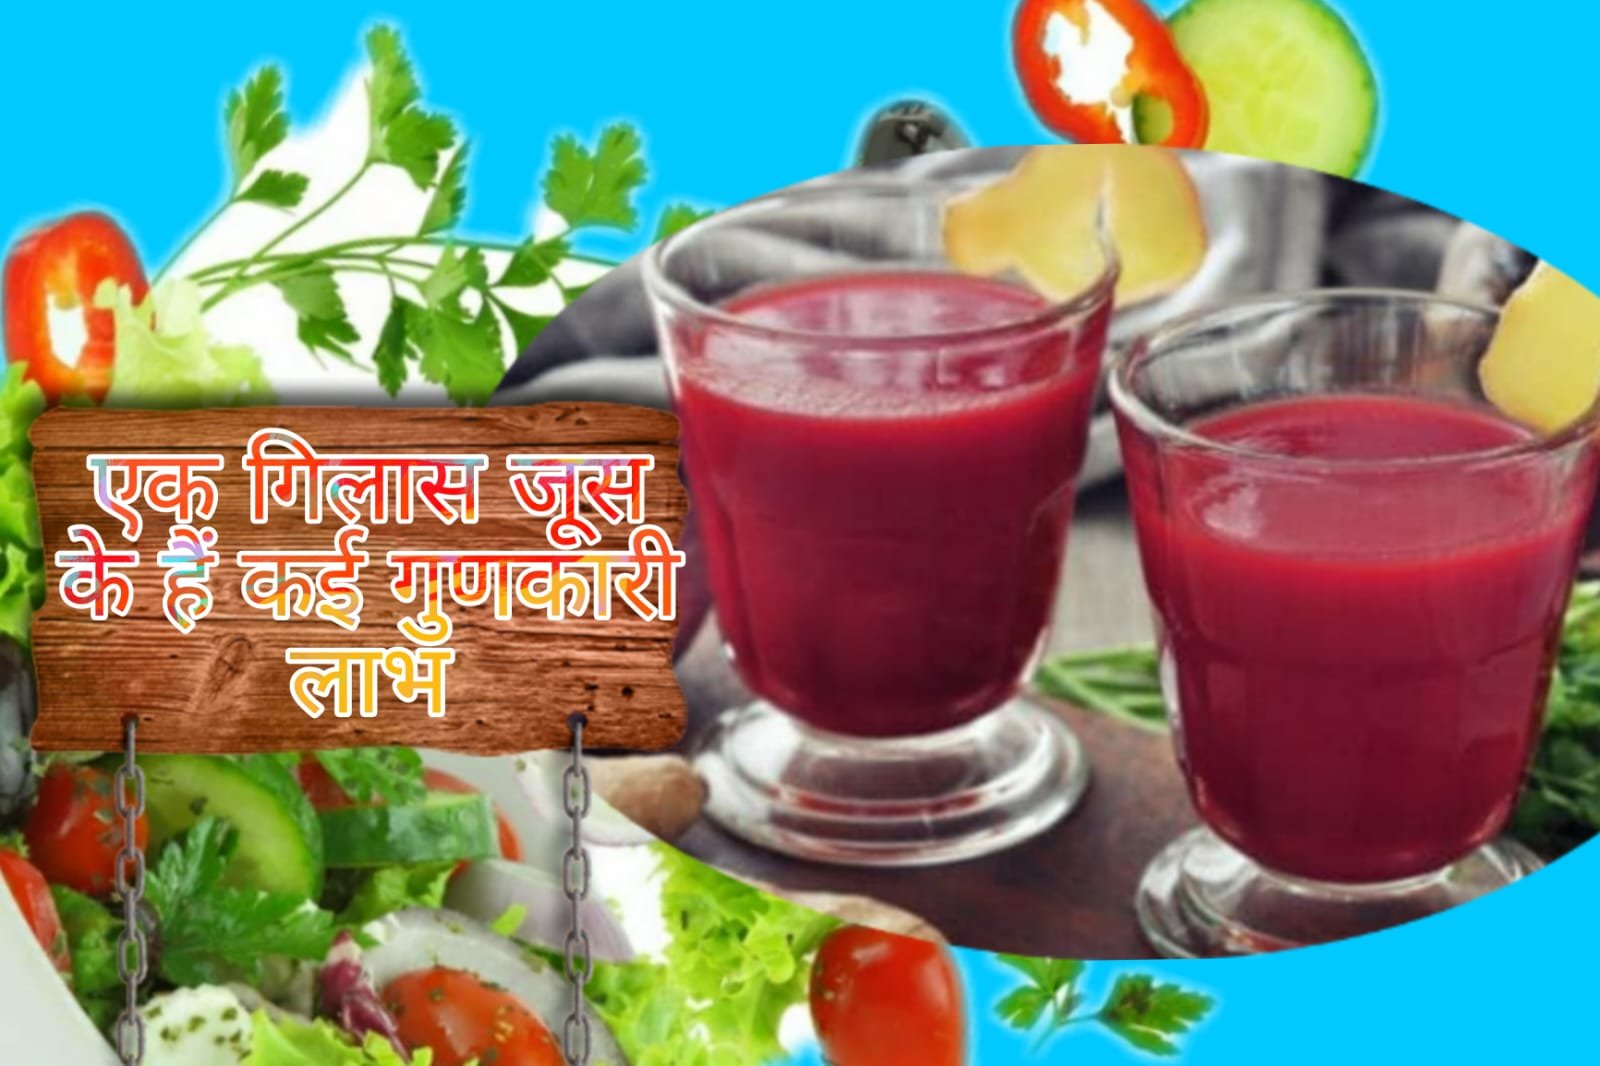 Healthy Juice Benefits - This one glass of juice has many beneficial benefits.